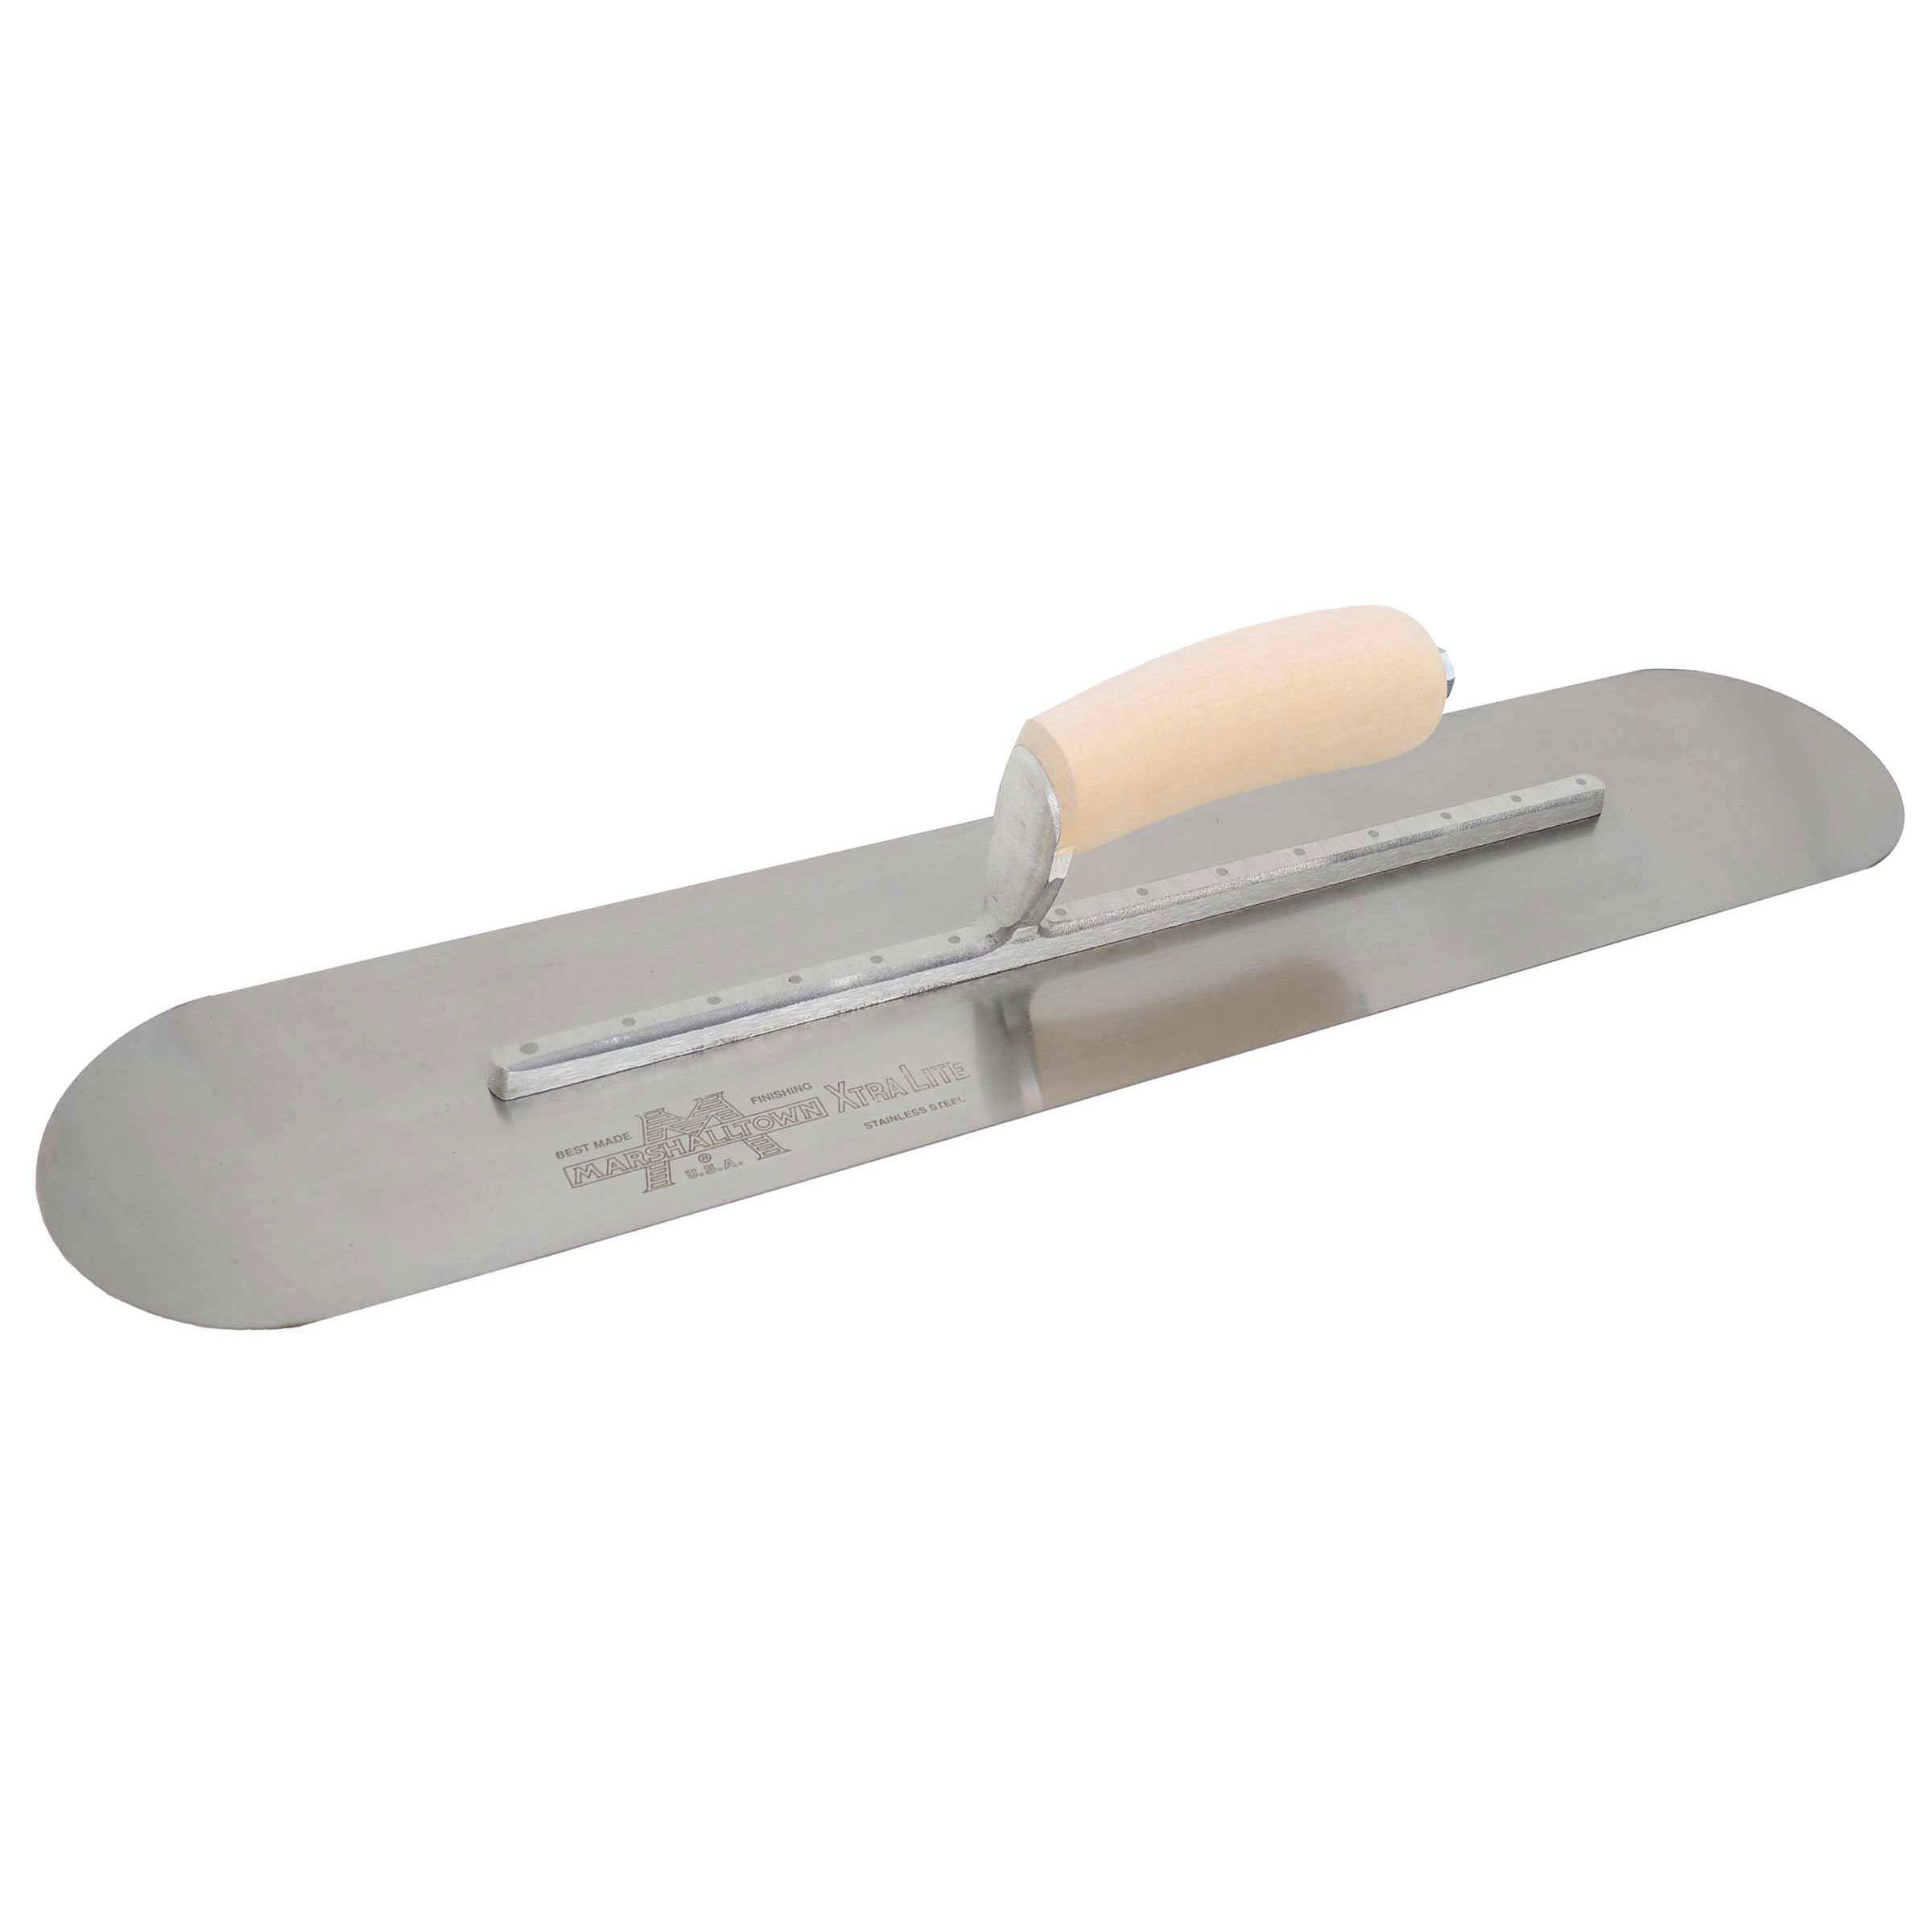 Marshalltown SP2245SSR14 22in x 4-1/2in Pool Trowel with Exposed Rivet Trowels and Wood Handle SP2245SSR14